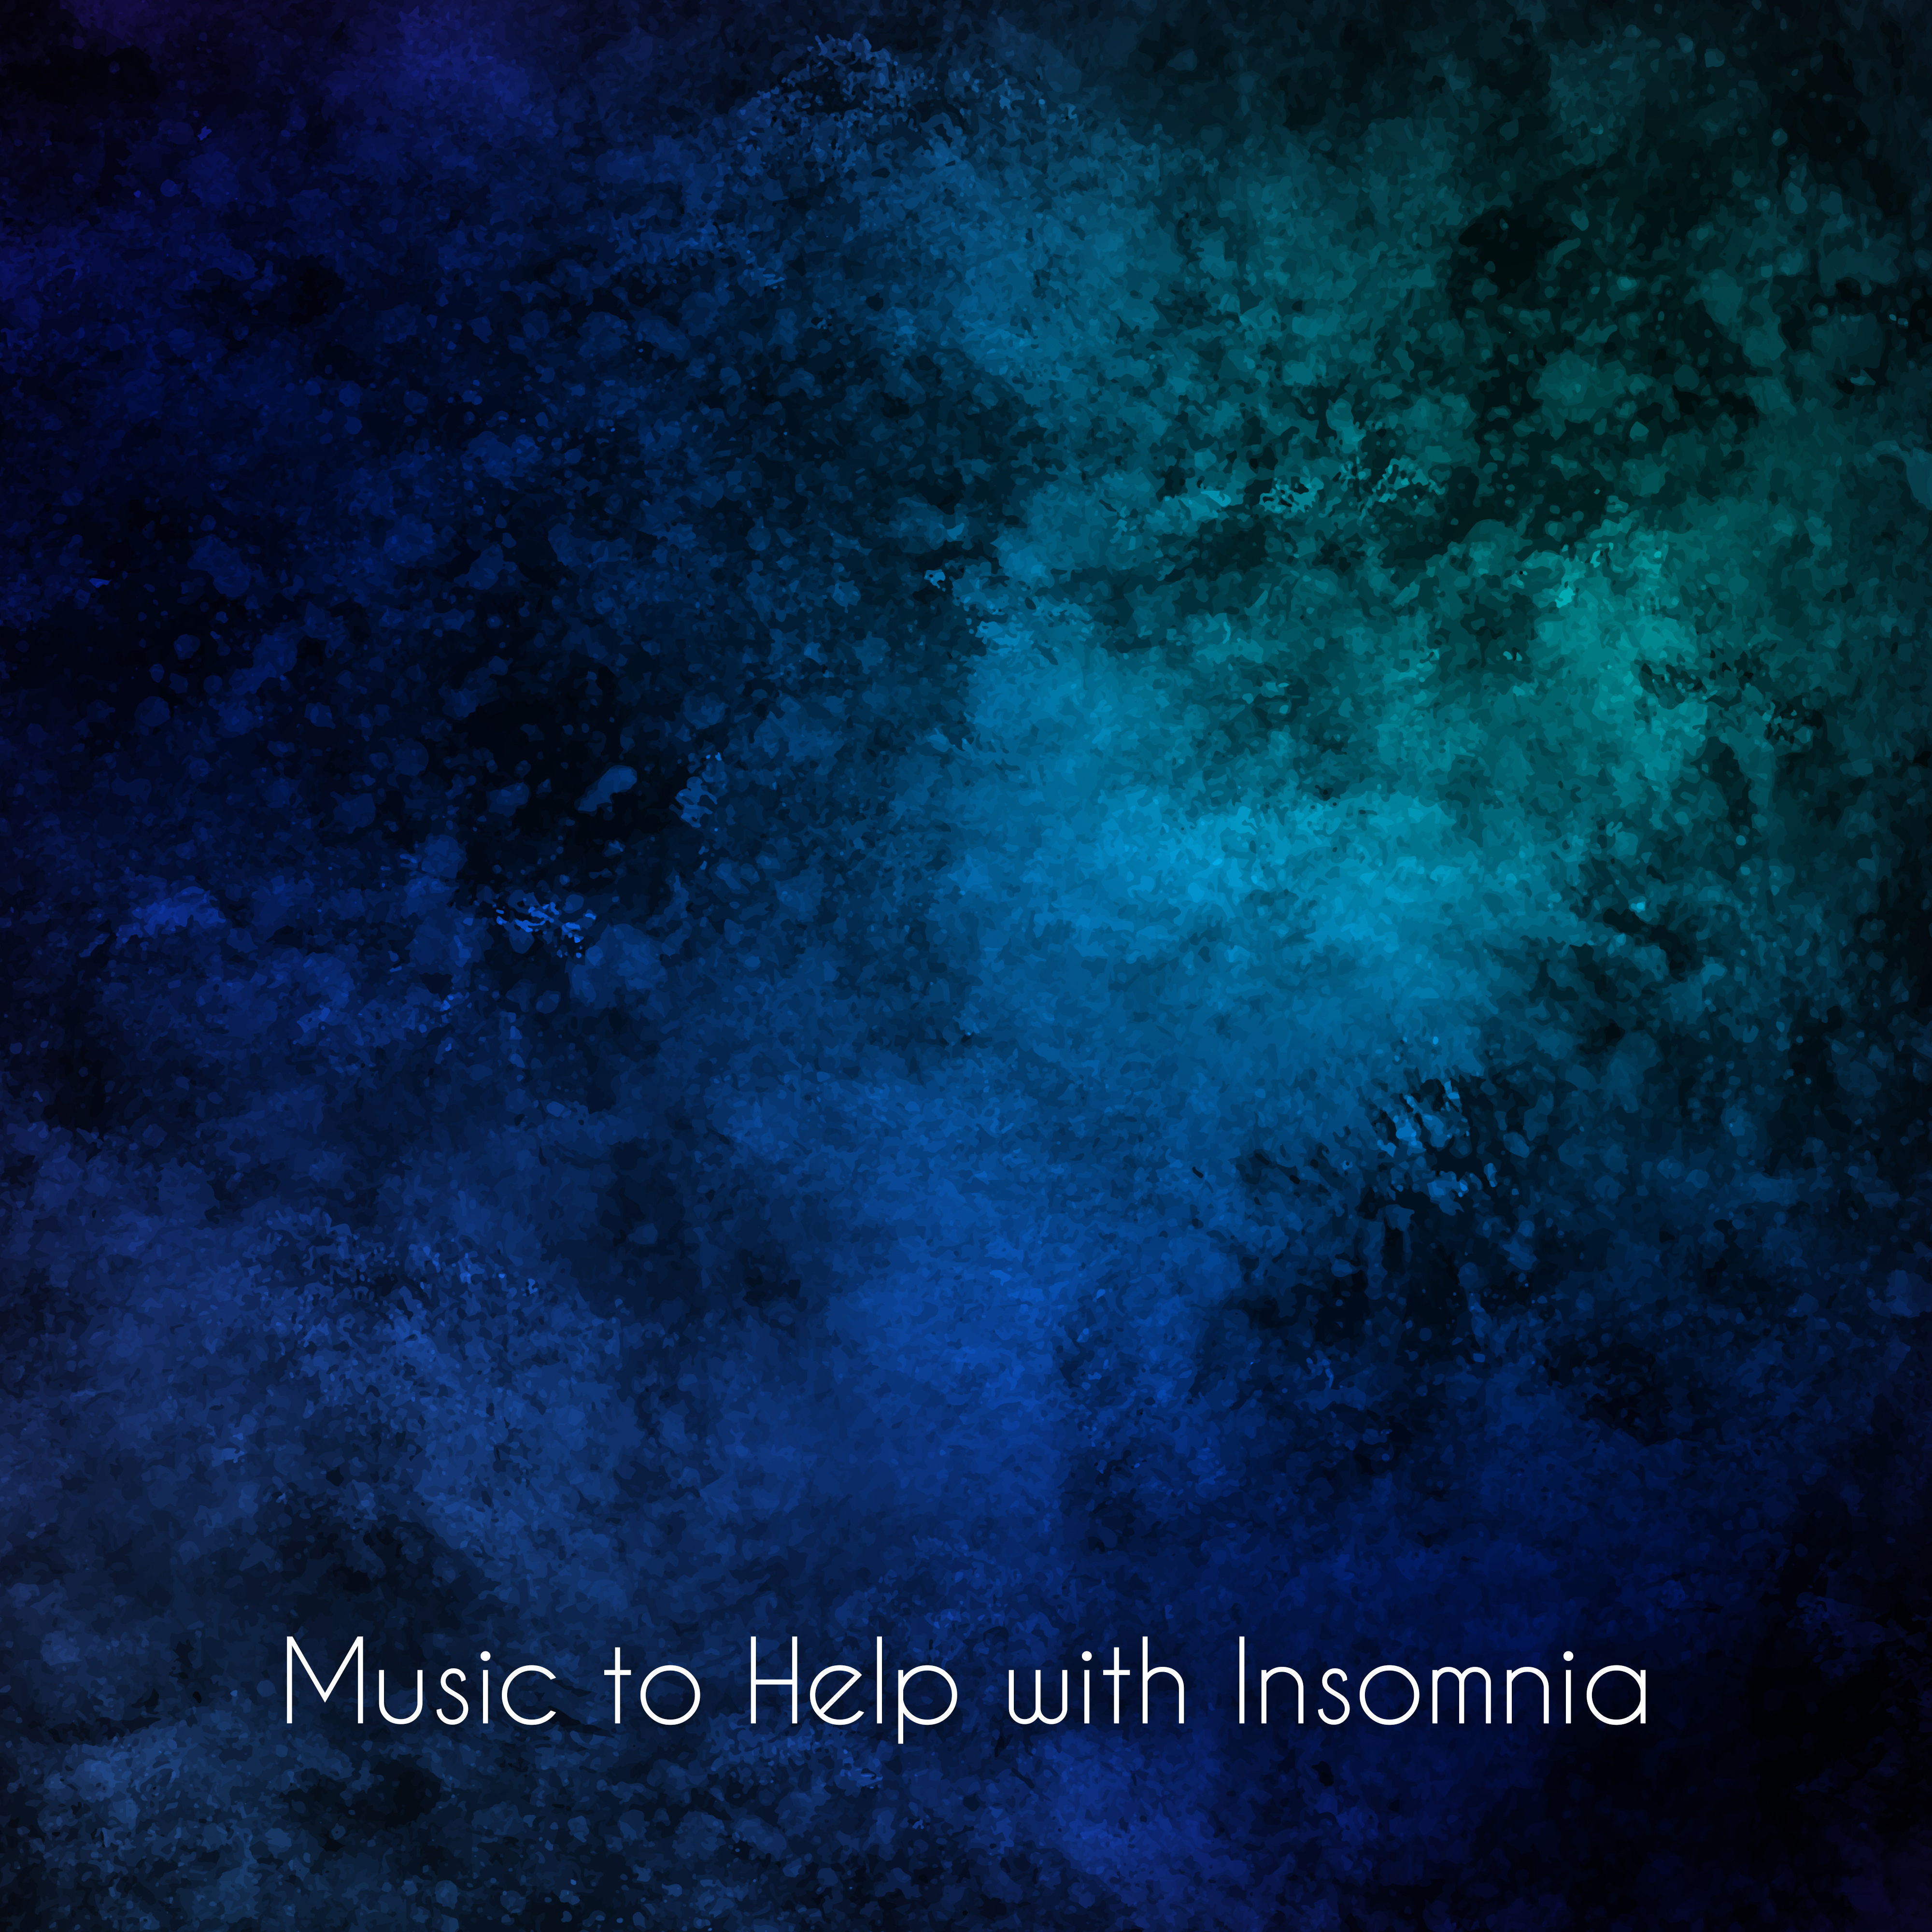 Music to Help with Insomnia